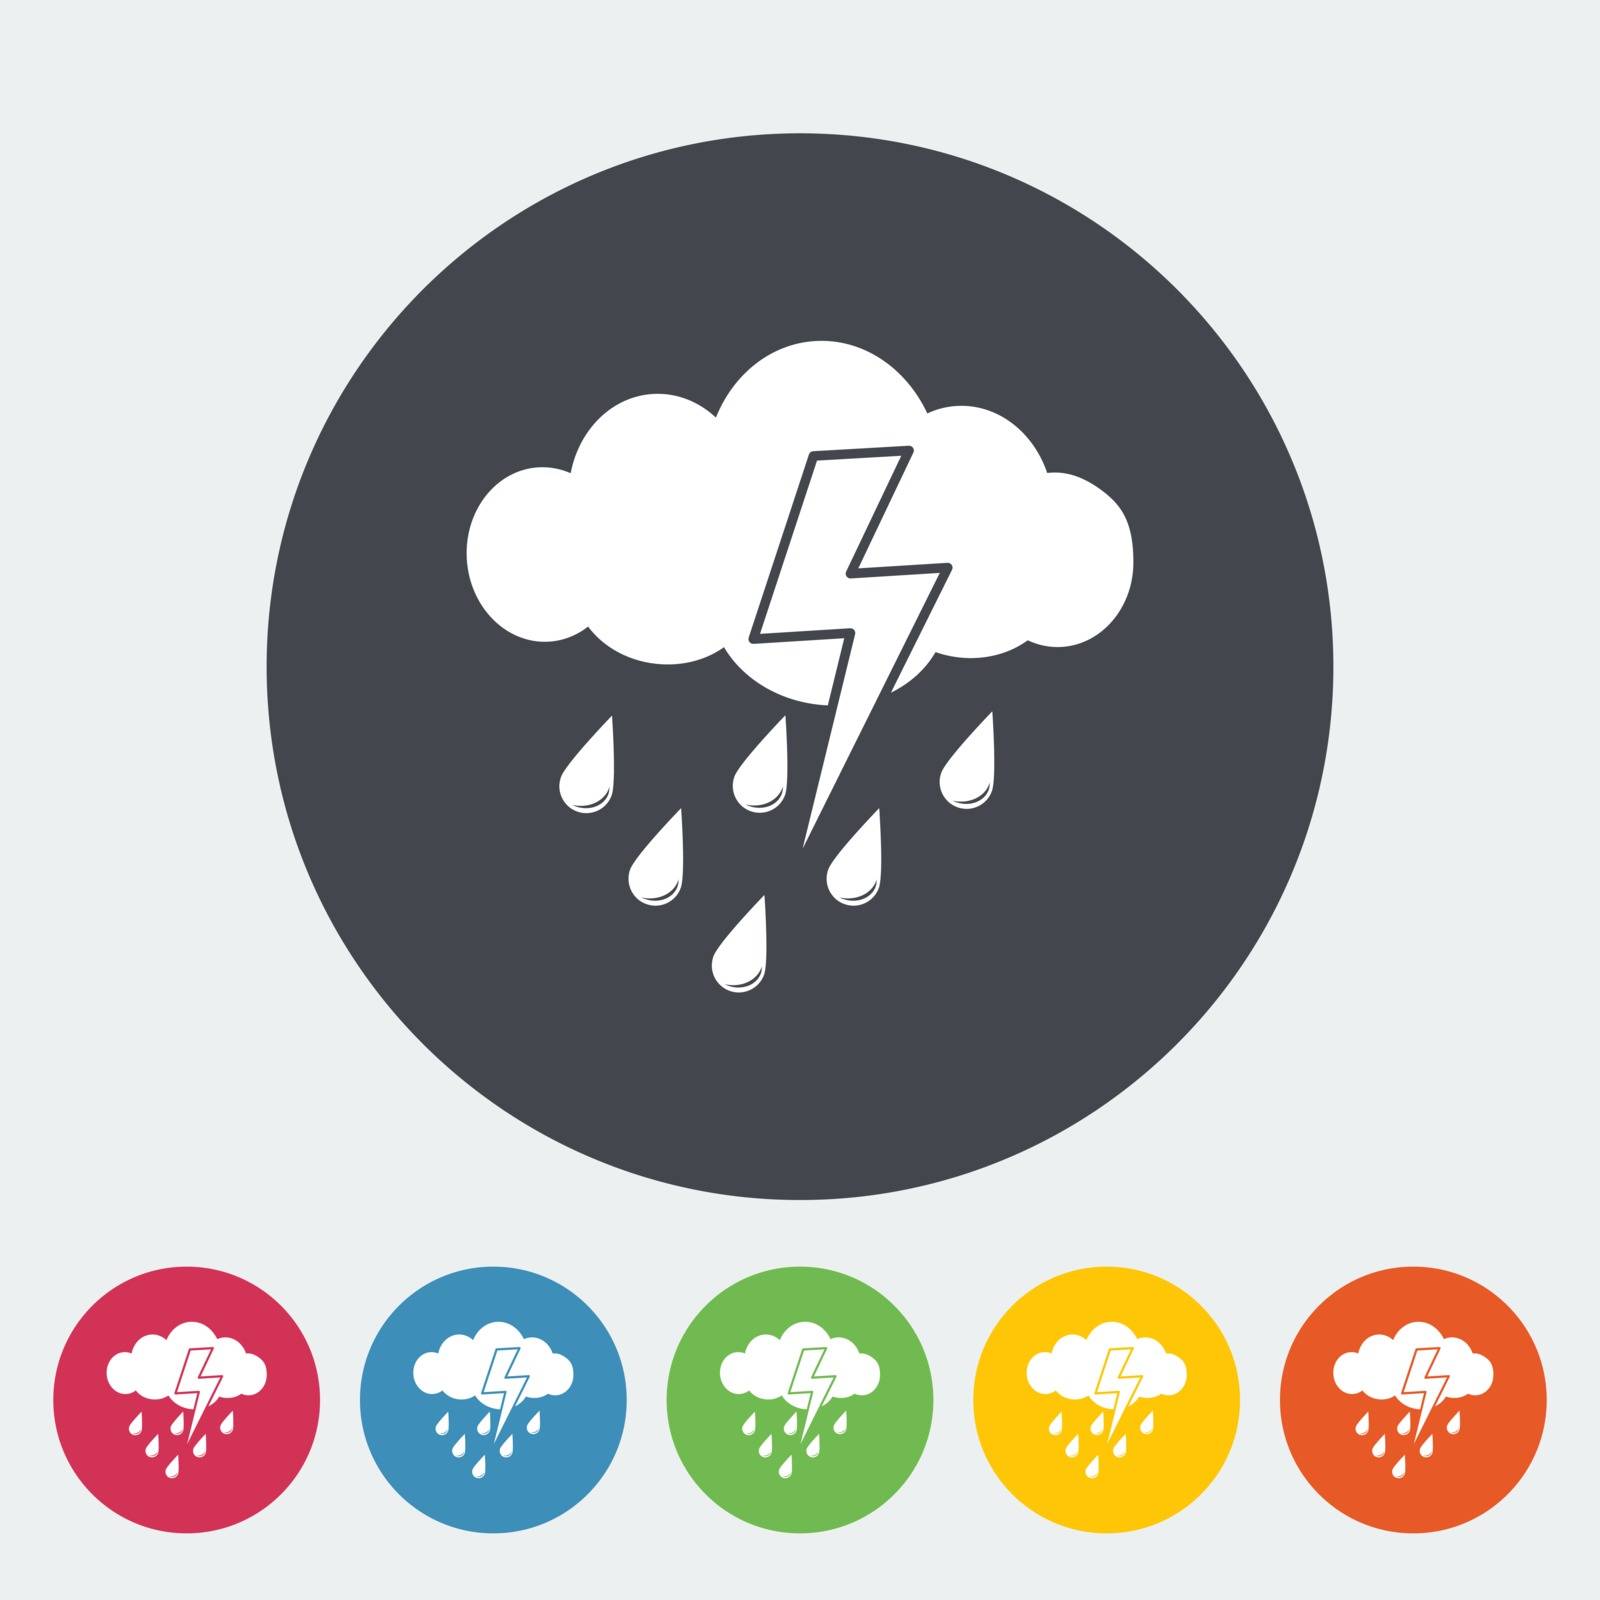 Storm. Single flat icon on the circle. Vector illustration.